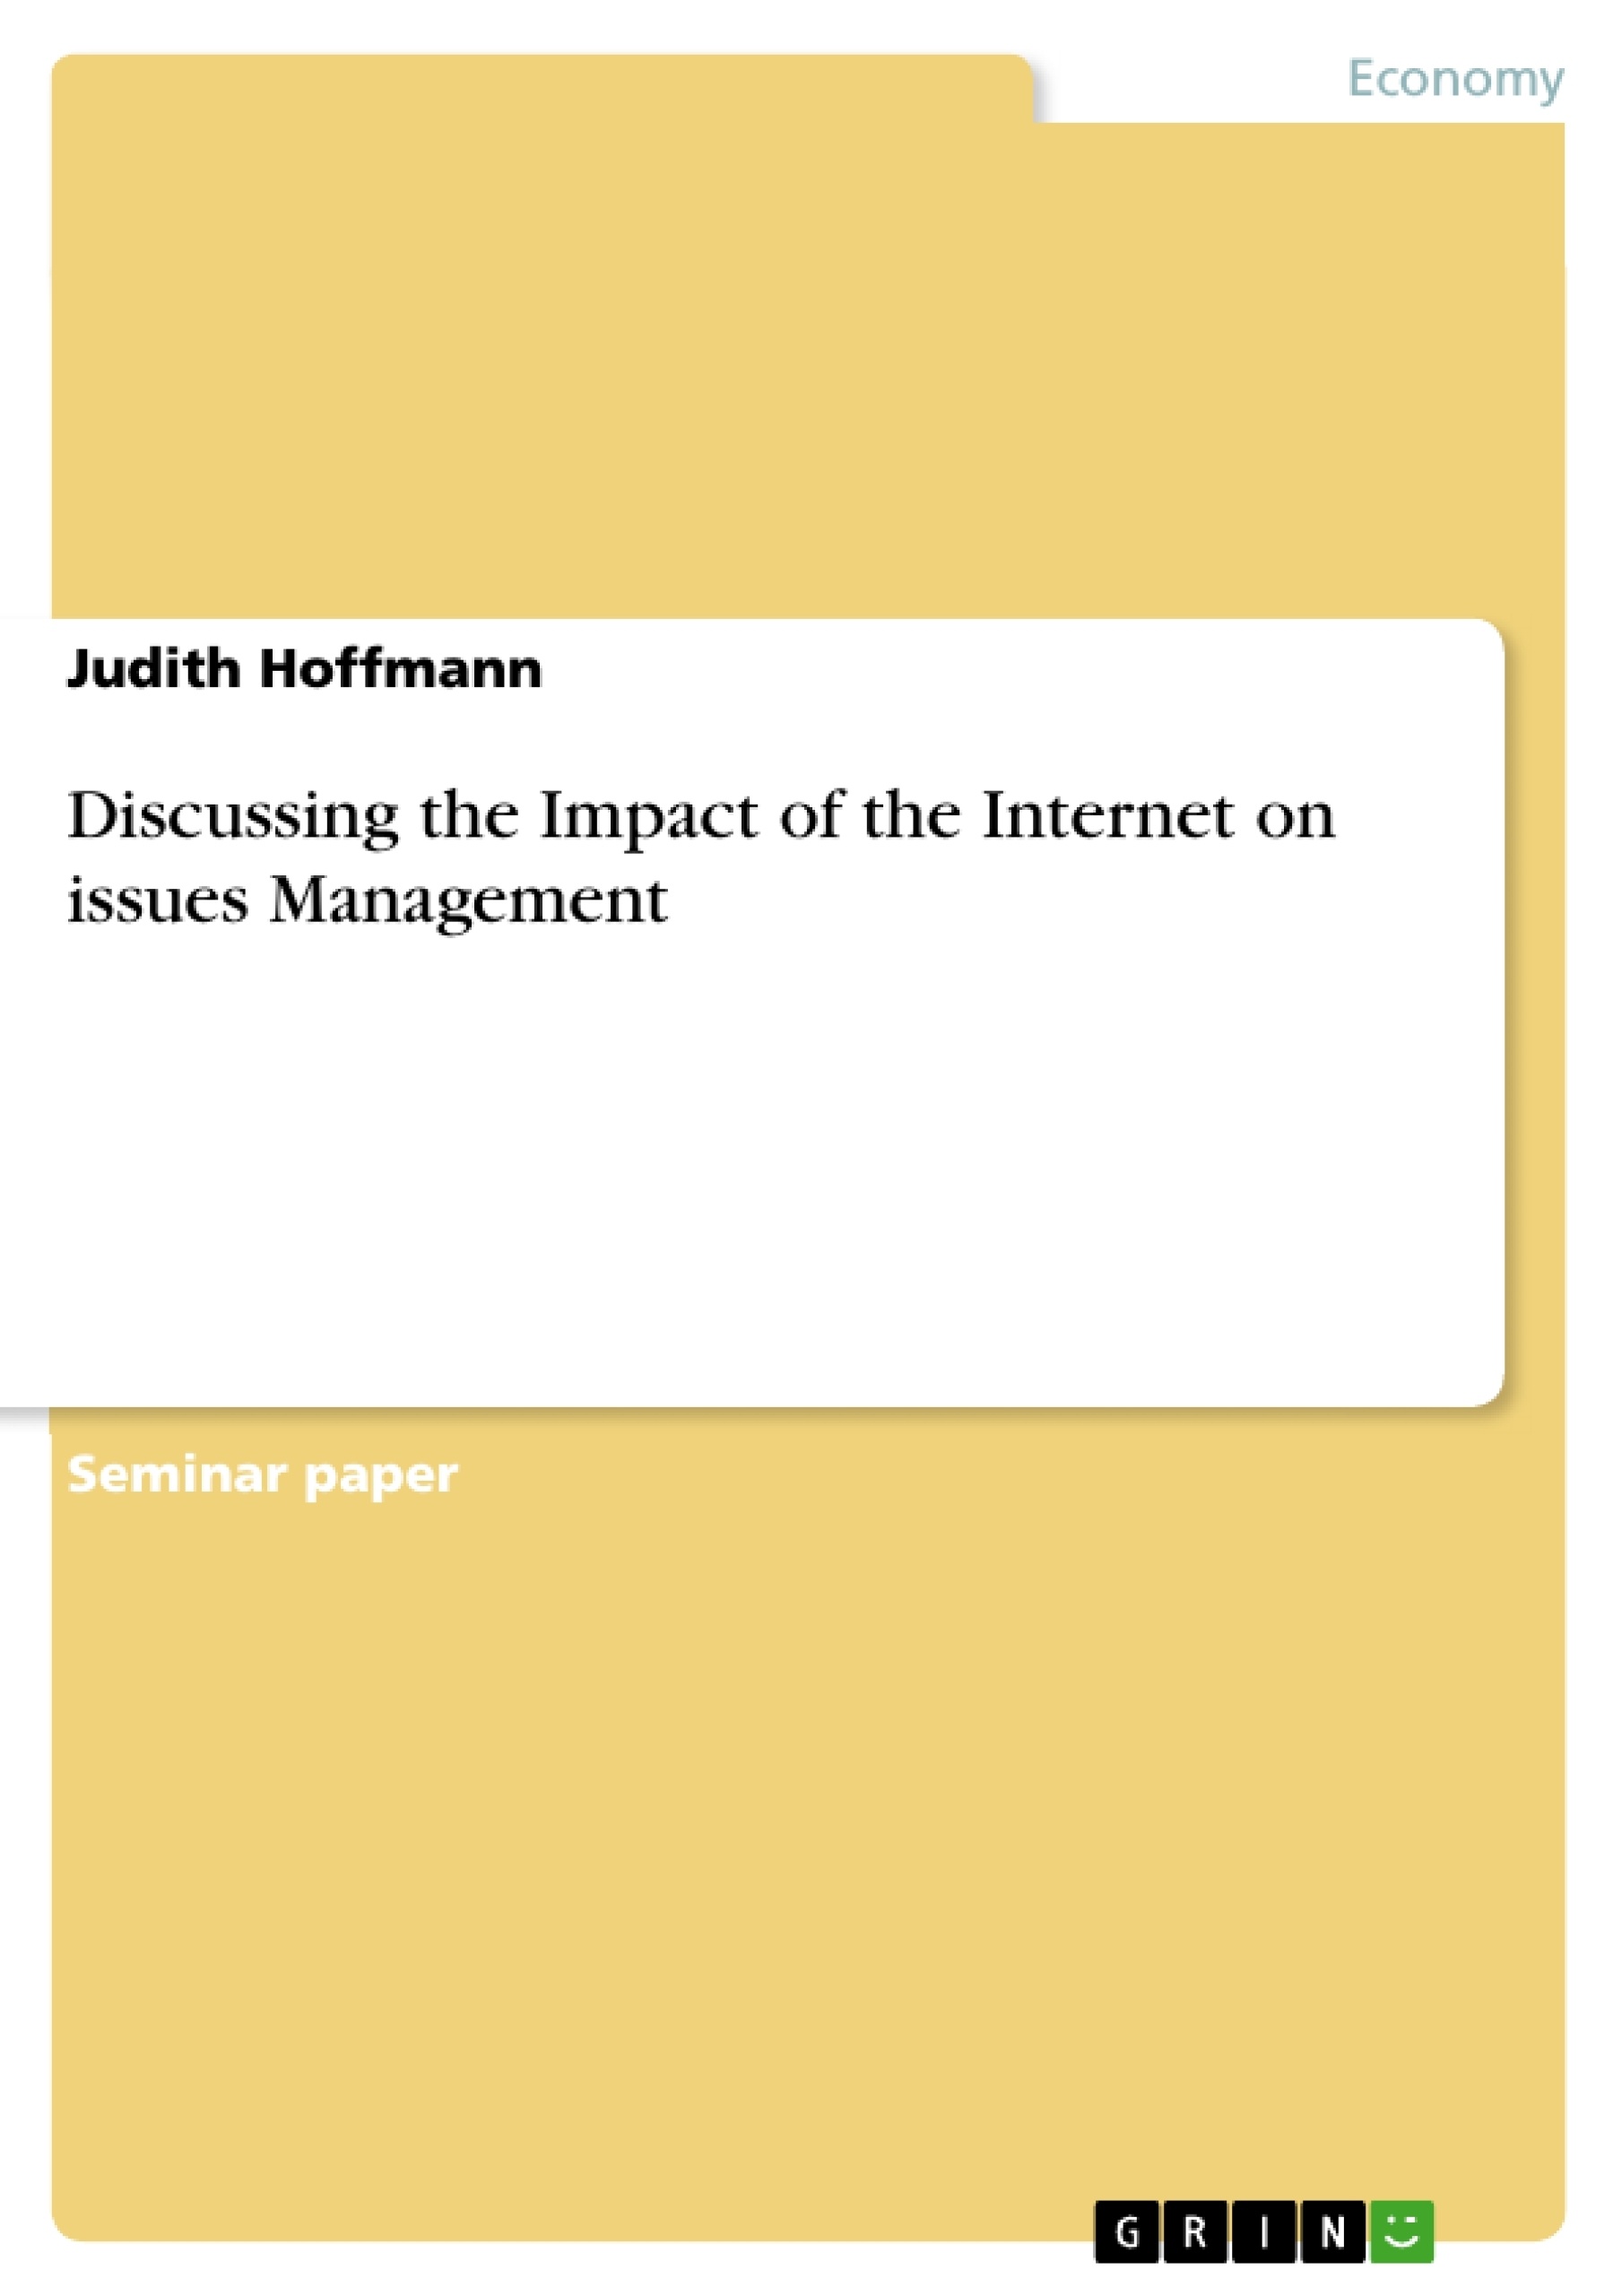 Title: Discussing the Impact of the Internet on issues Management